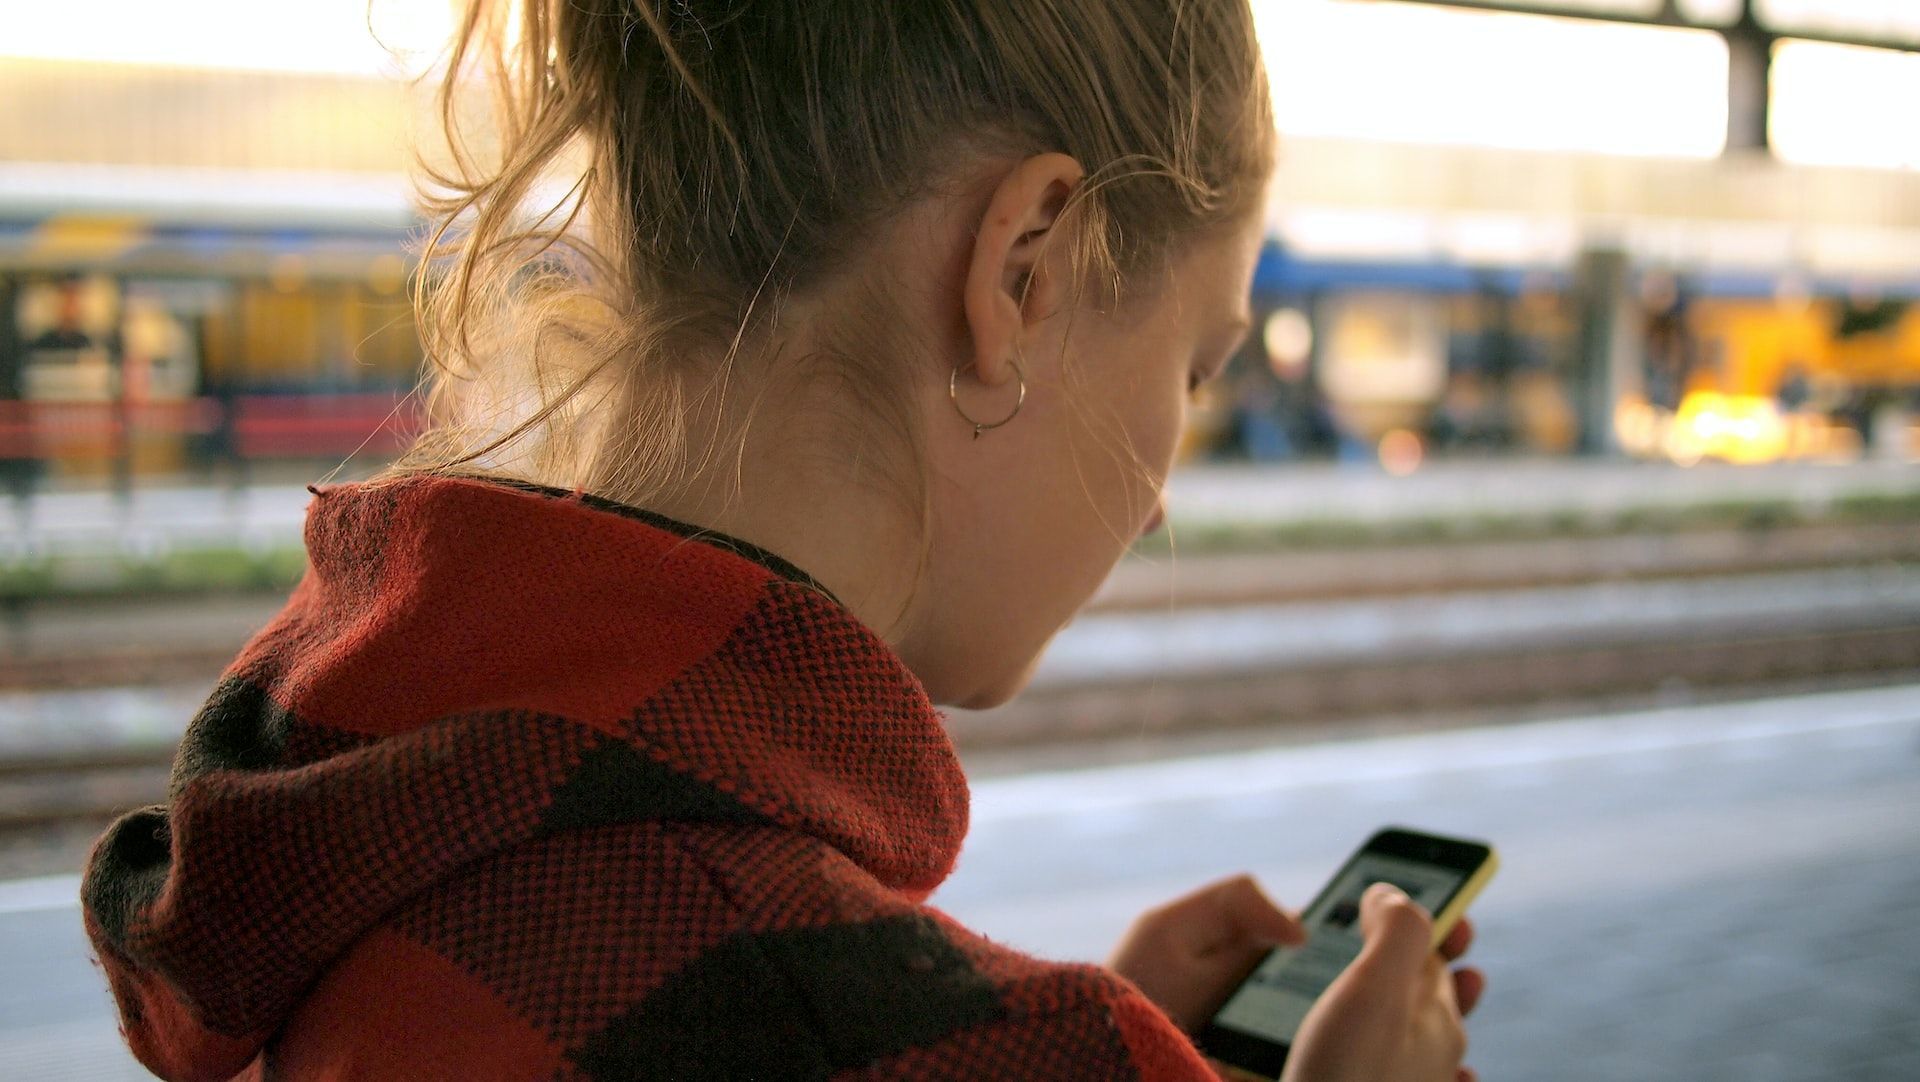 A woman using a mobile app on her phone at a train station.